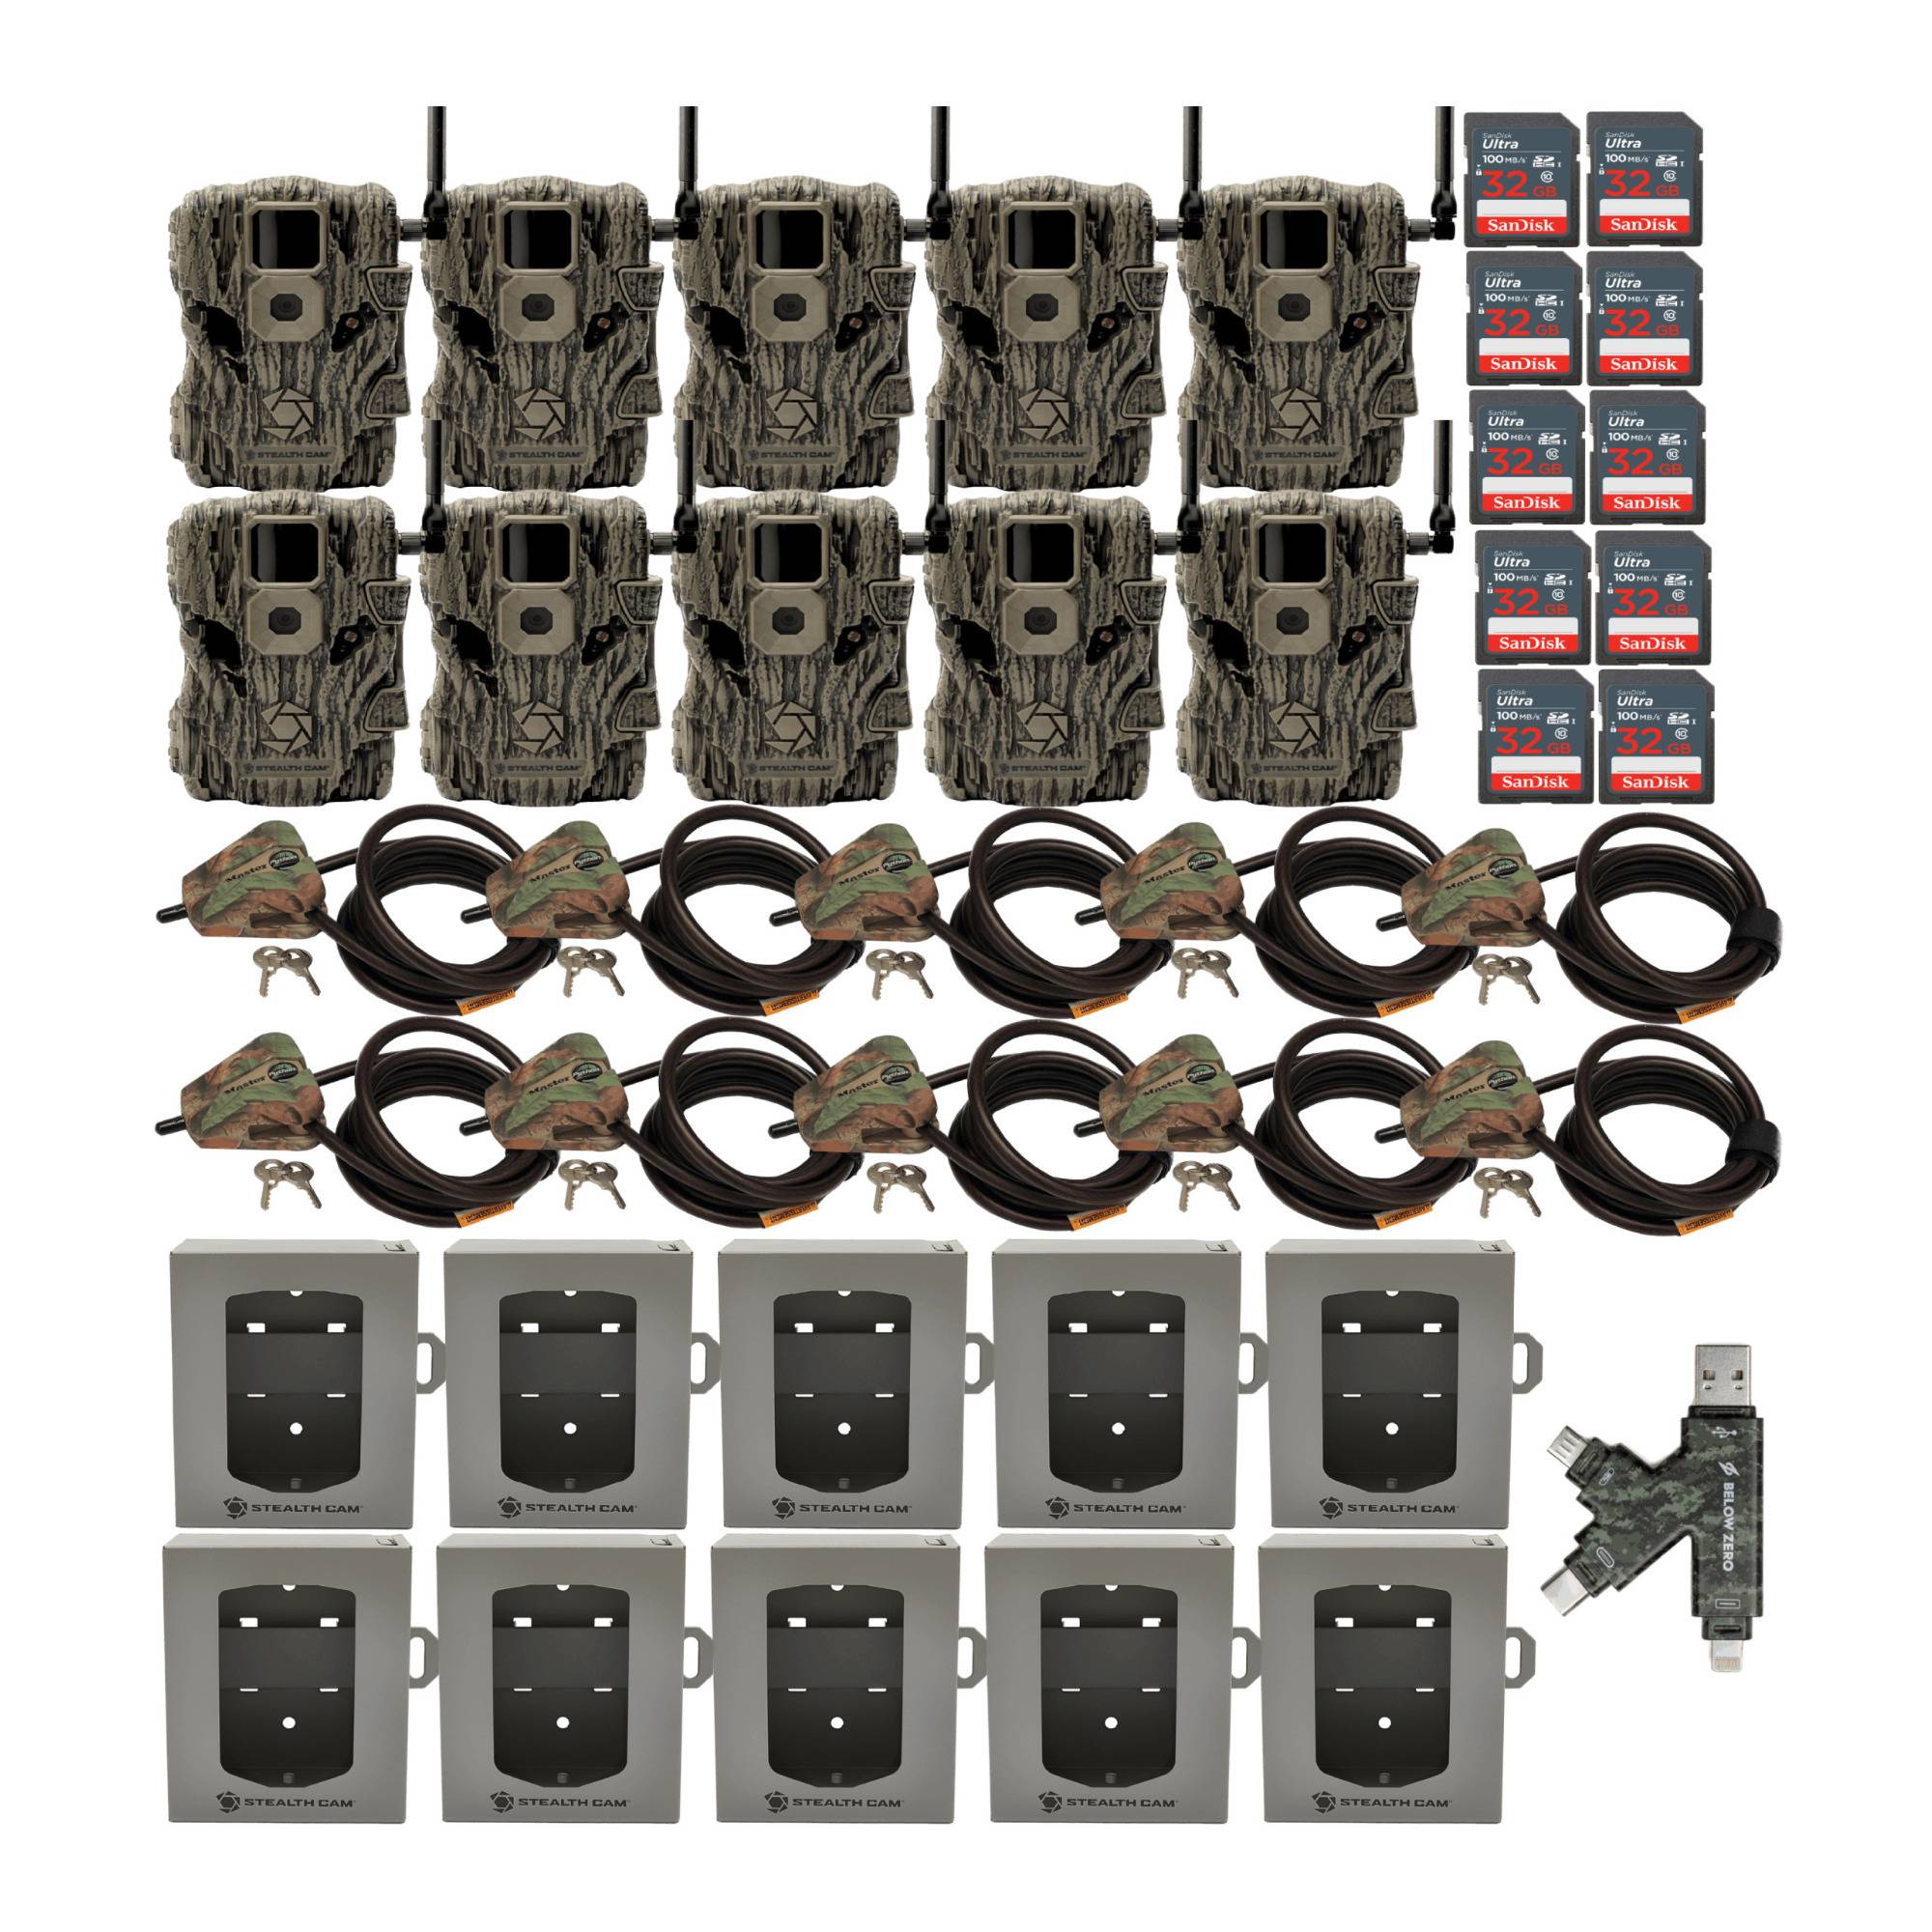 Stealth Cam Fusion X 26MP Trail Camera (AT&T) Super Security Bundle (10-Pack)